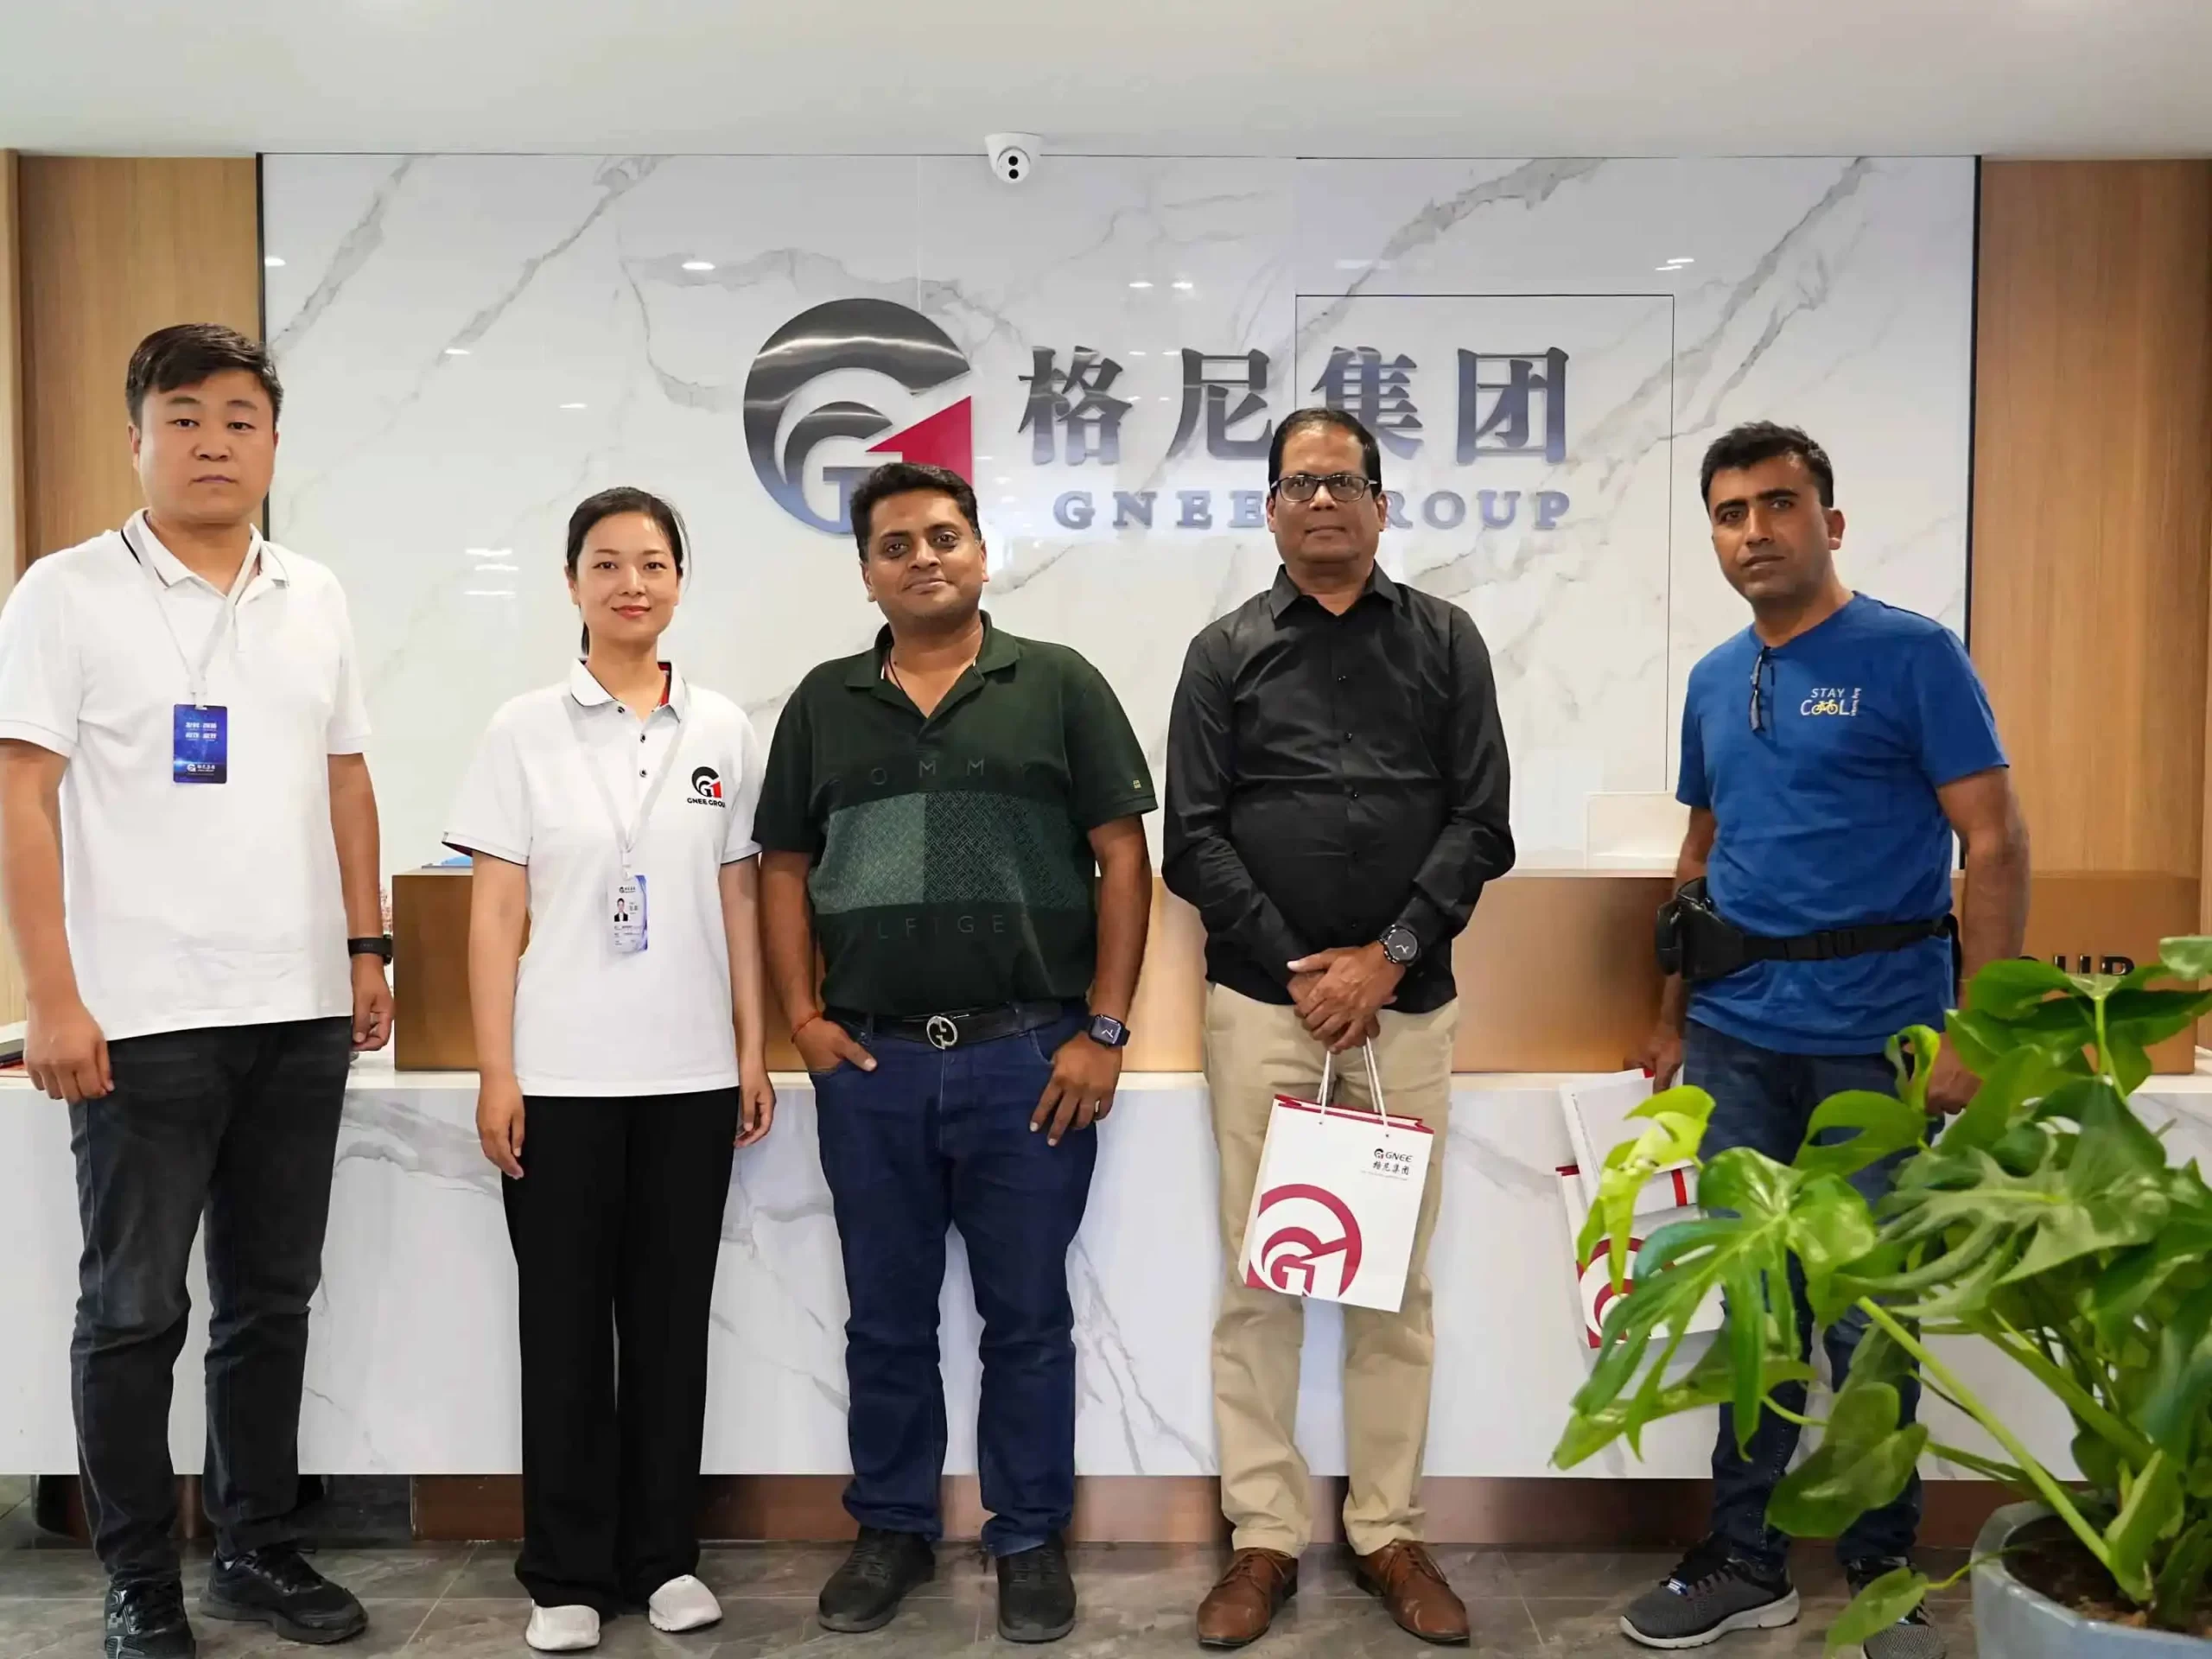 GNEE Group and Indian Customers Reached a Strategic Cooperation image